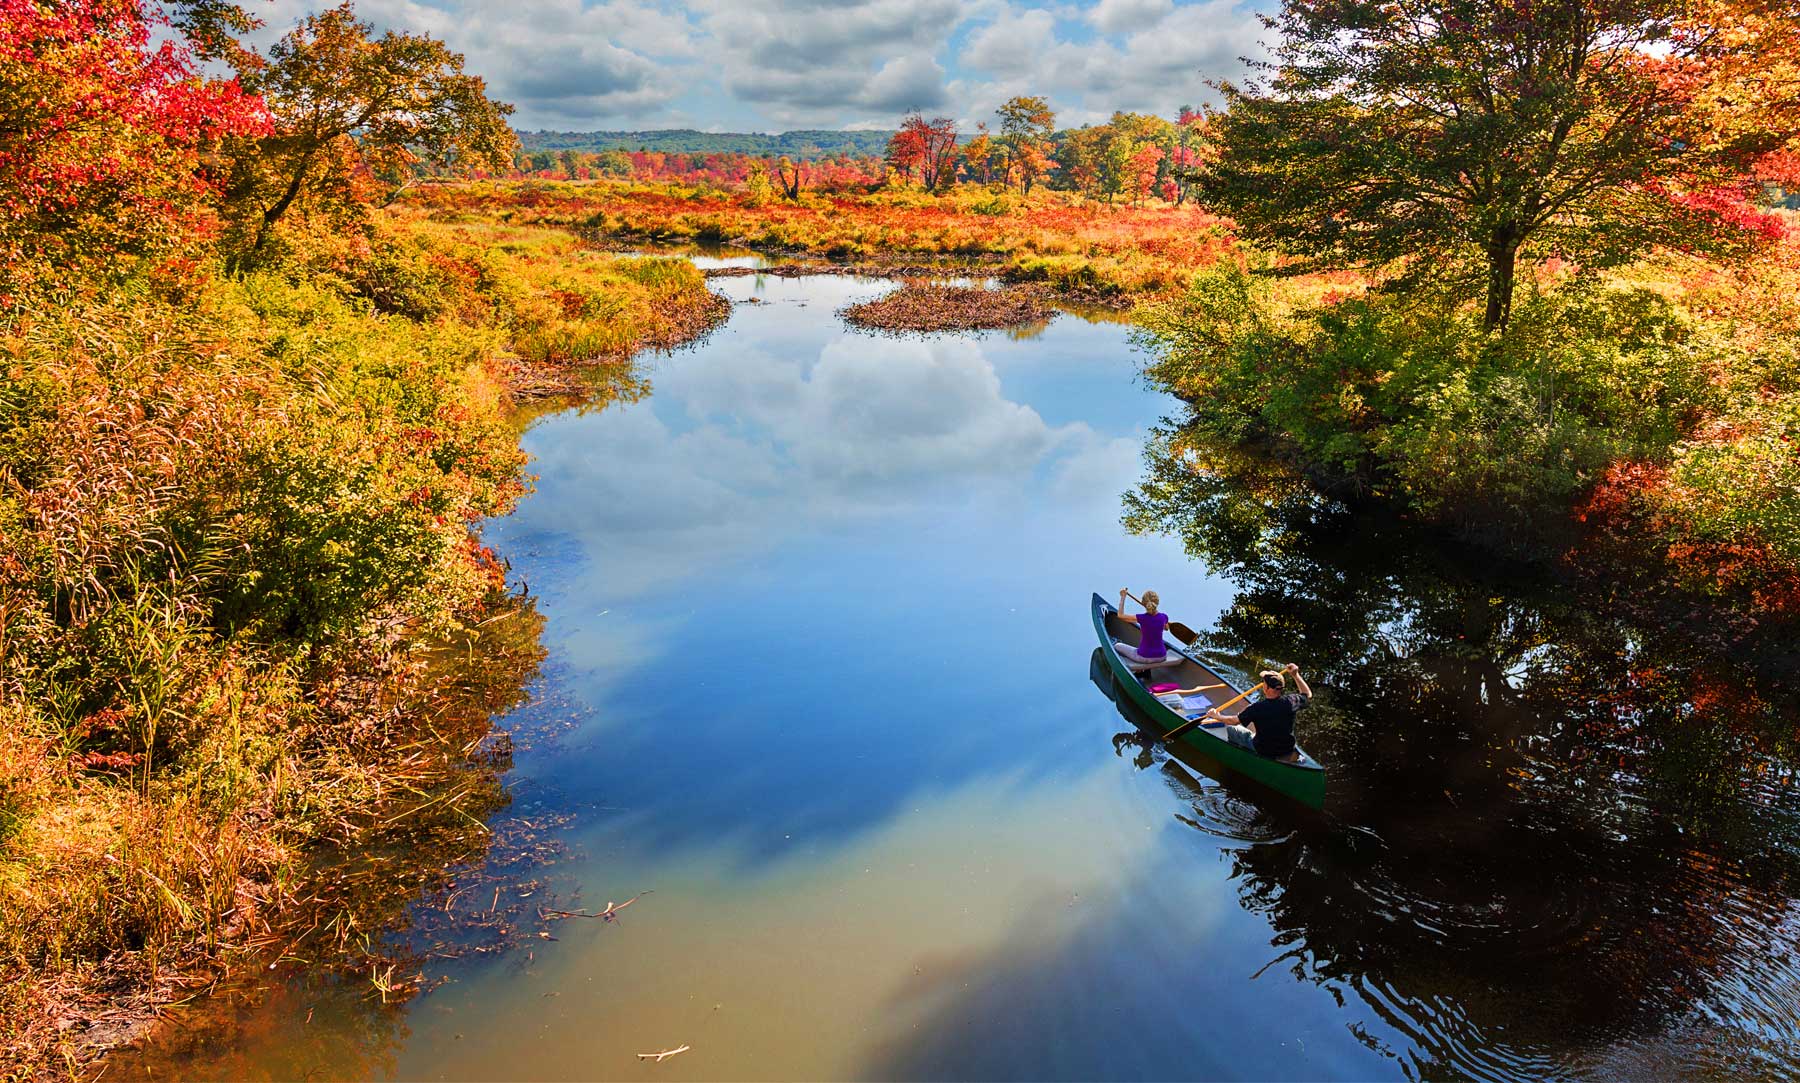 Two people on a canoe, on a river, surrounded by fall foliage